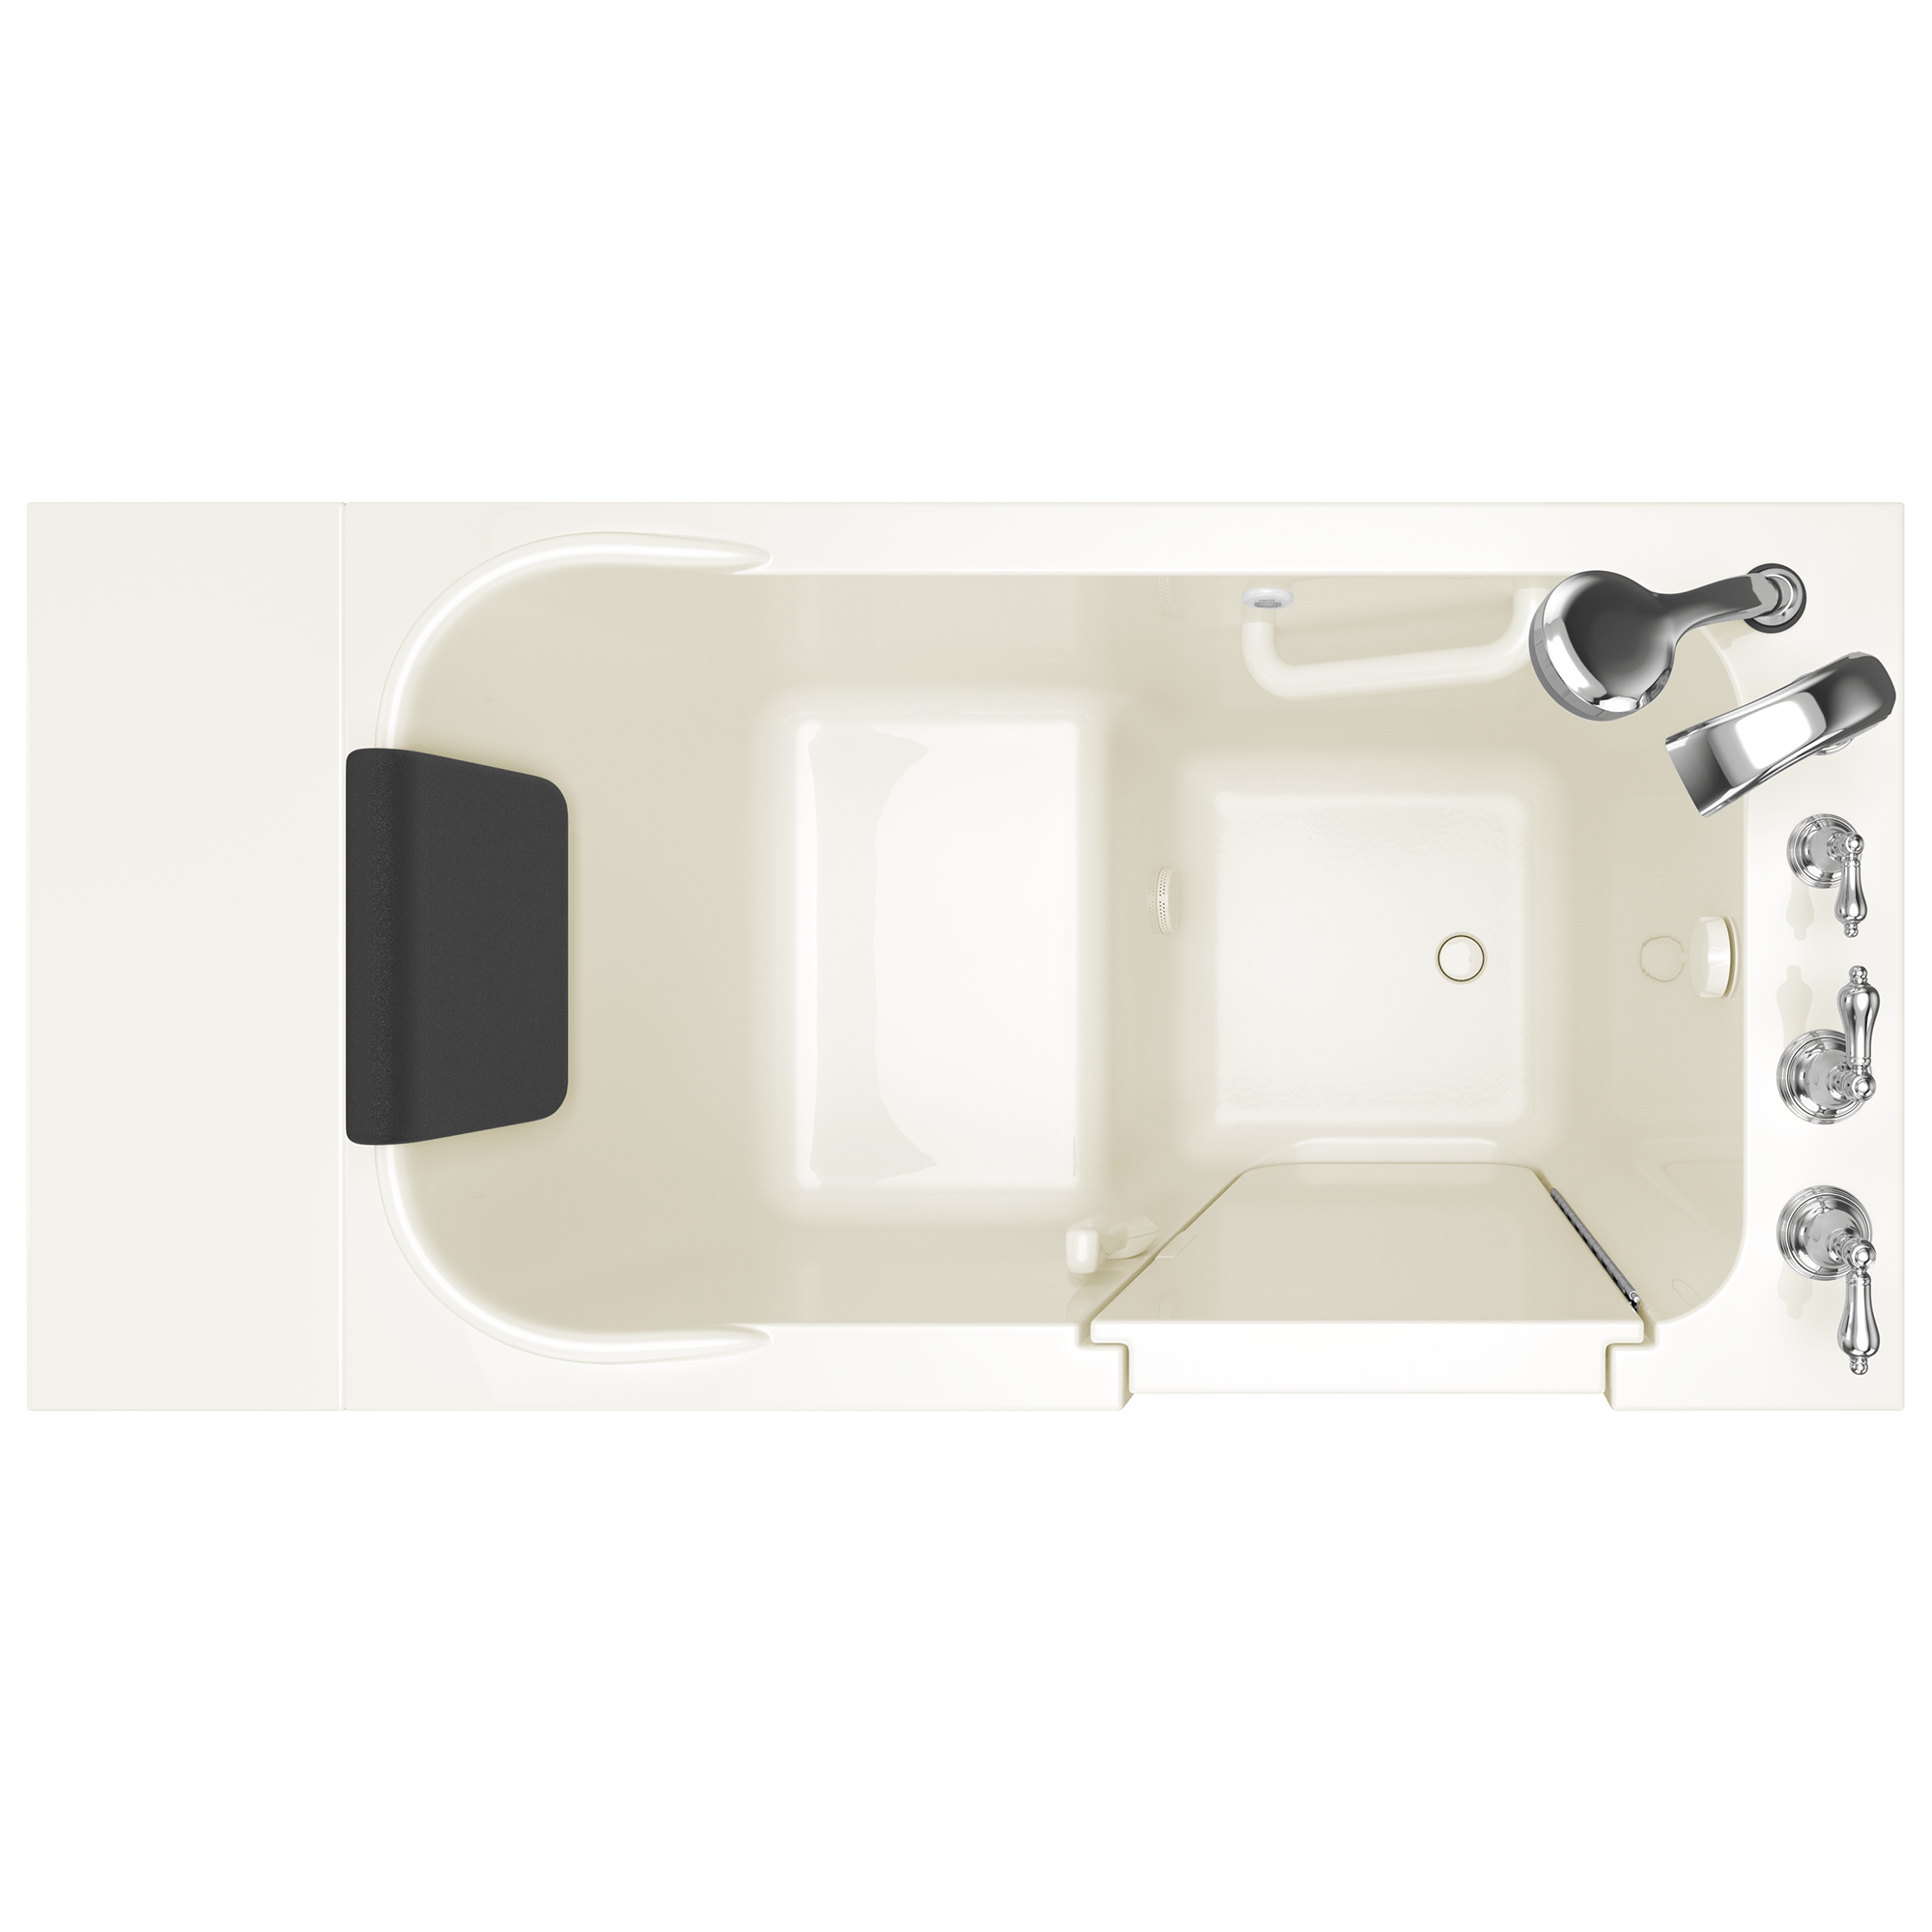 Gelcoat Premium Series 28 x 48 Inch Walk in Tub With Soaker System   Right Hand Drain With Faucet WIB LINEN